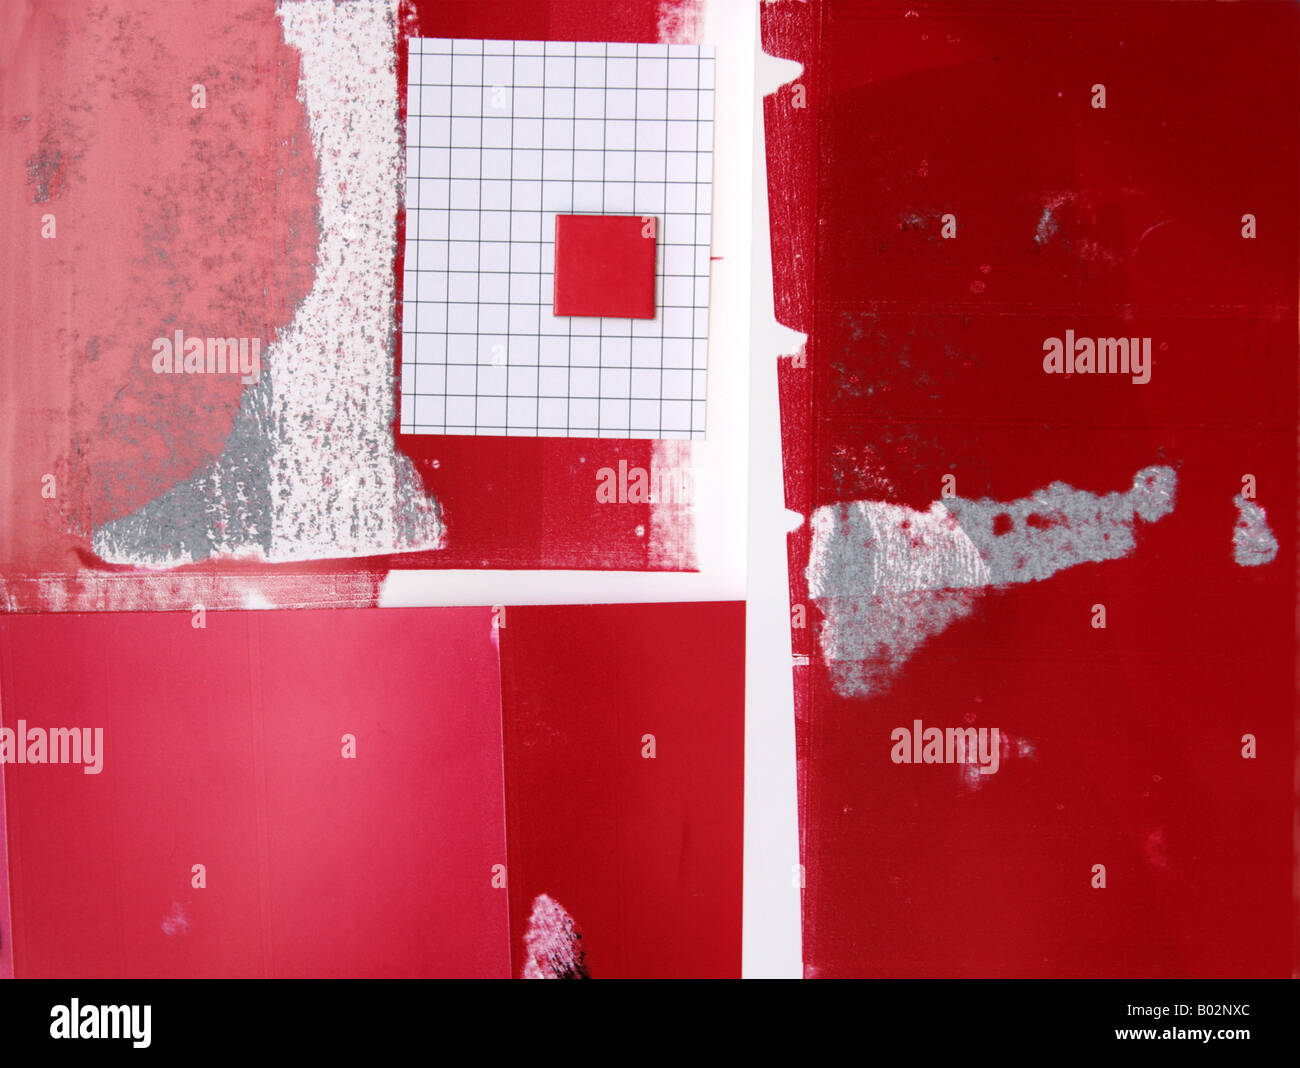 collage of red and white printer blotting papers with graph paper Stock Photo